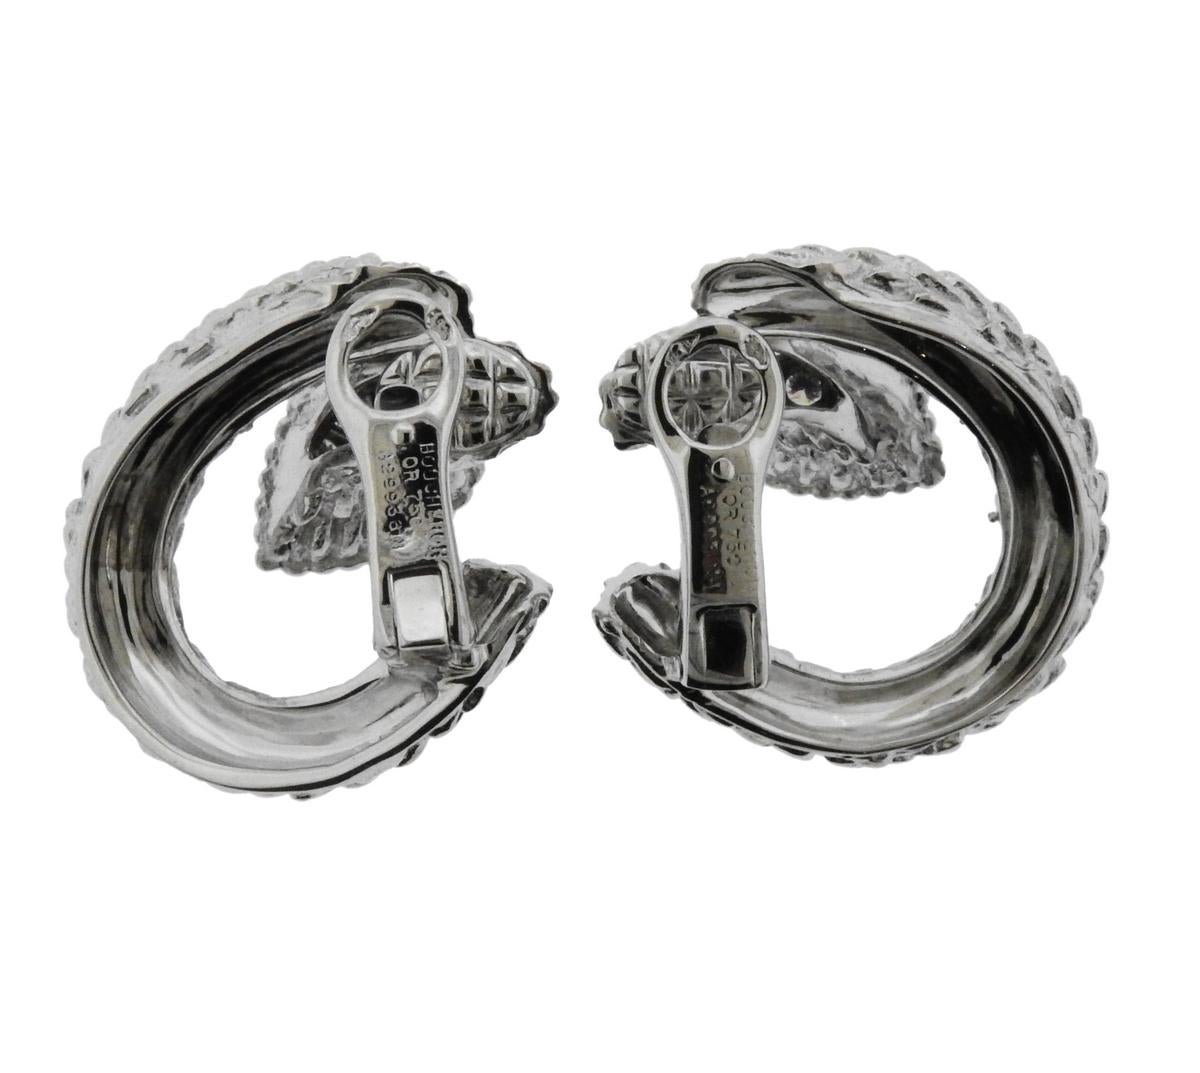 Pair of 18k white gold earrings, crafted by Boucheron for Serpent Boheme collection, adorned with approx. 0.50ctw in G/VS diamonds.  Earrings are 24mm x 25mm, weigh 19.7 grams. Marked: Boucheron, or750, serial number.